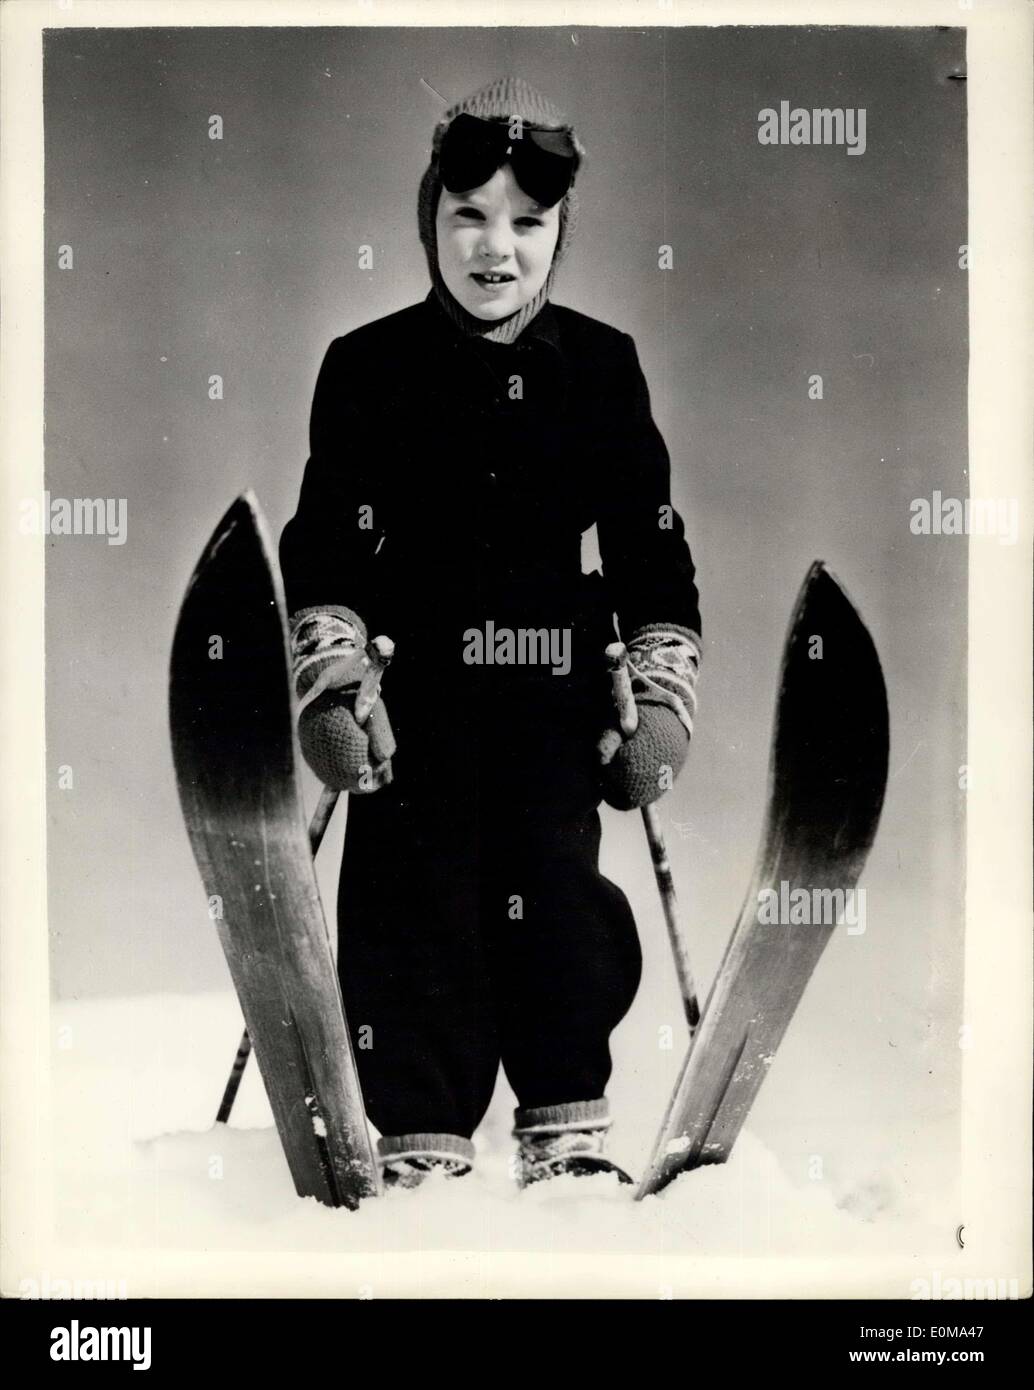 Mar. 10, 1954 - Danish Princess Out Skiing, In Norway. Photo Shows: Princess Anne-Marie of Denmark, photographed on skis in Norway, where, with her two sisters, Princess Margrethe and Princess Bendeikte, she is enjoying a winter holiday in the Norwegian mountains Stock Photo